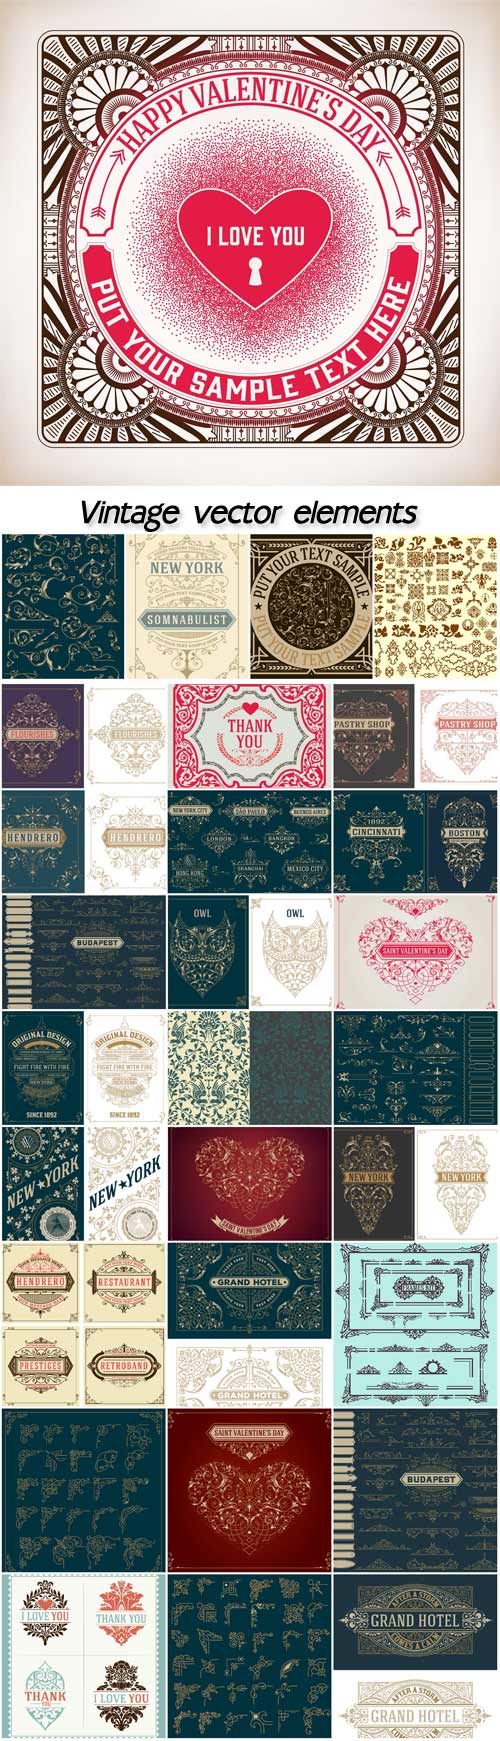 Vintage elements for banners, invitations, posters, placards, badges or logotypes